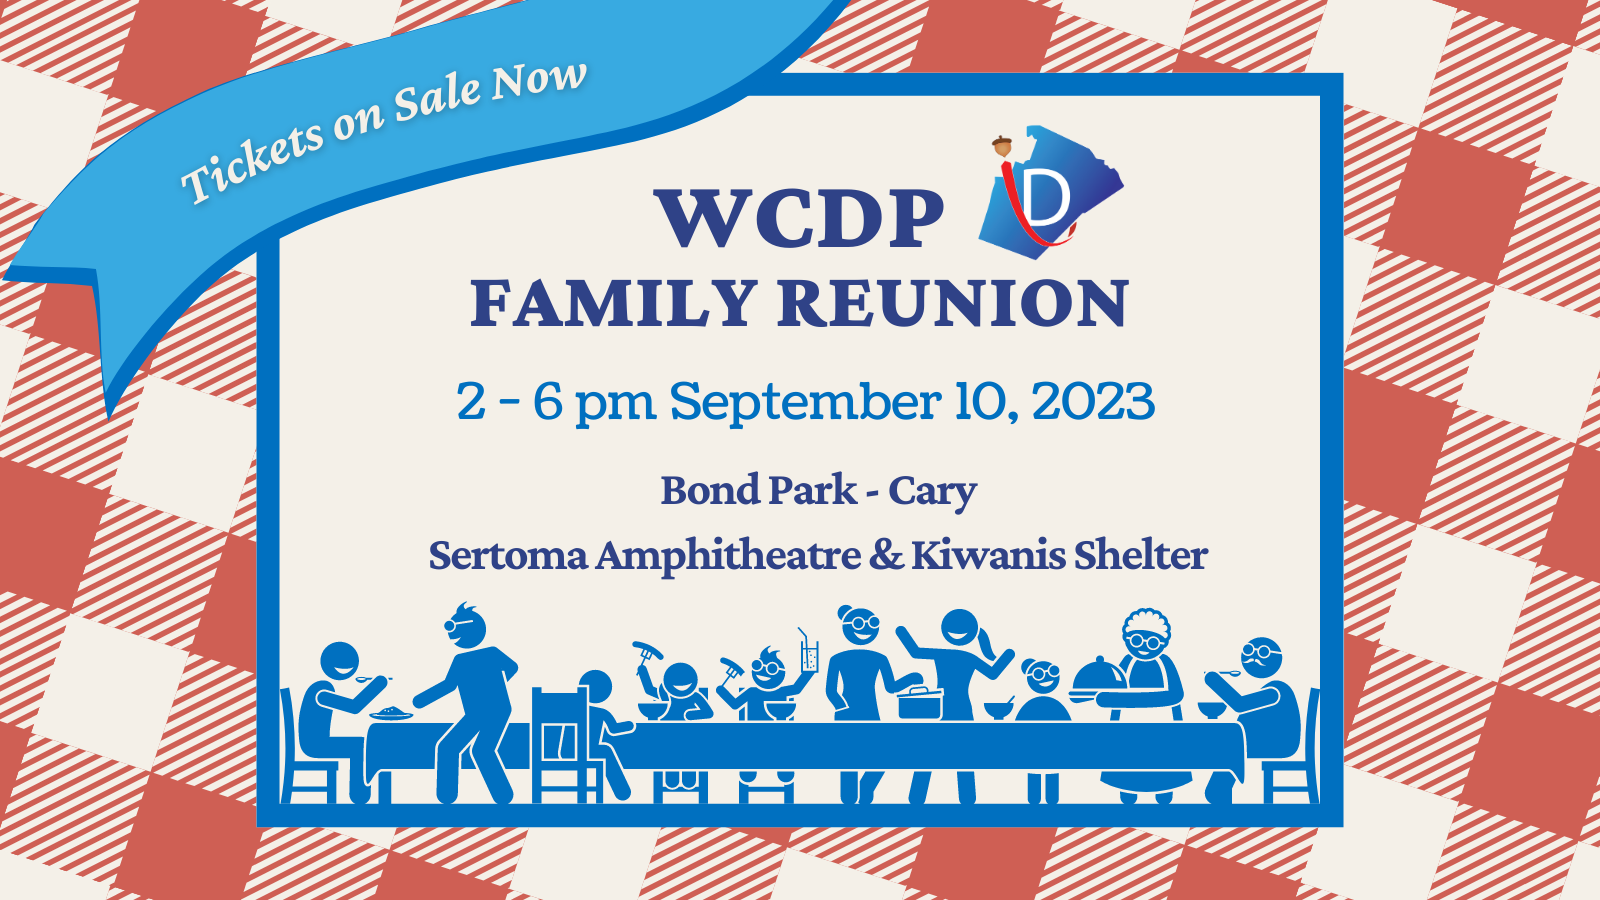 WCDP Family Reunion